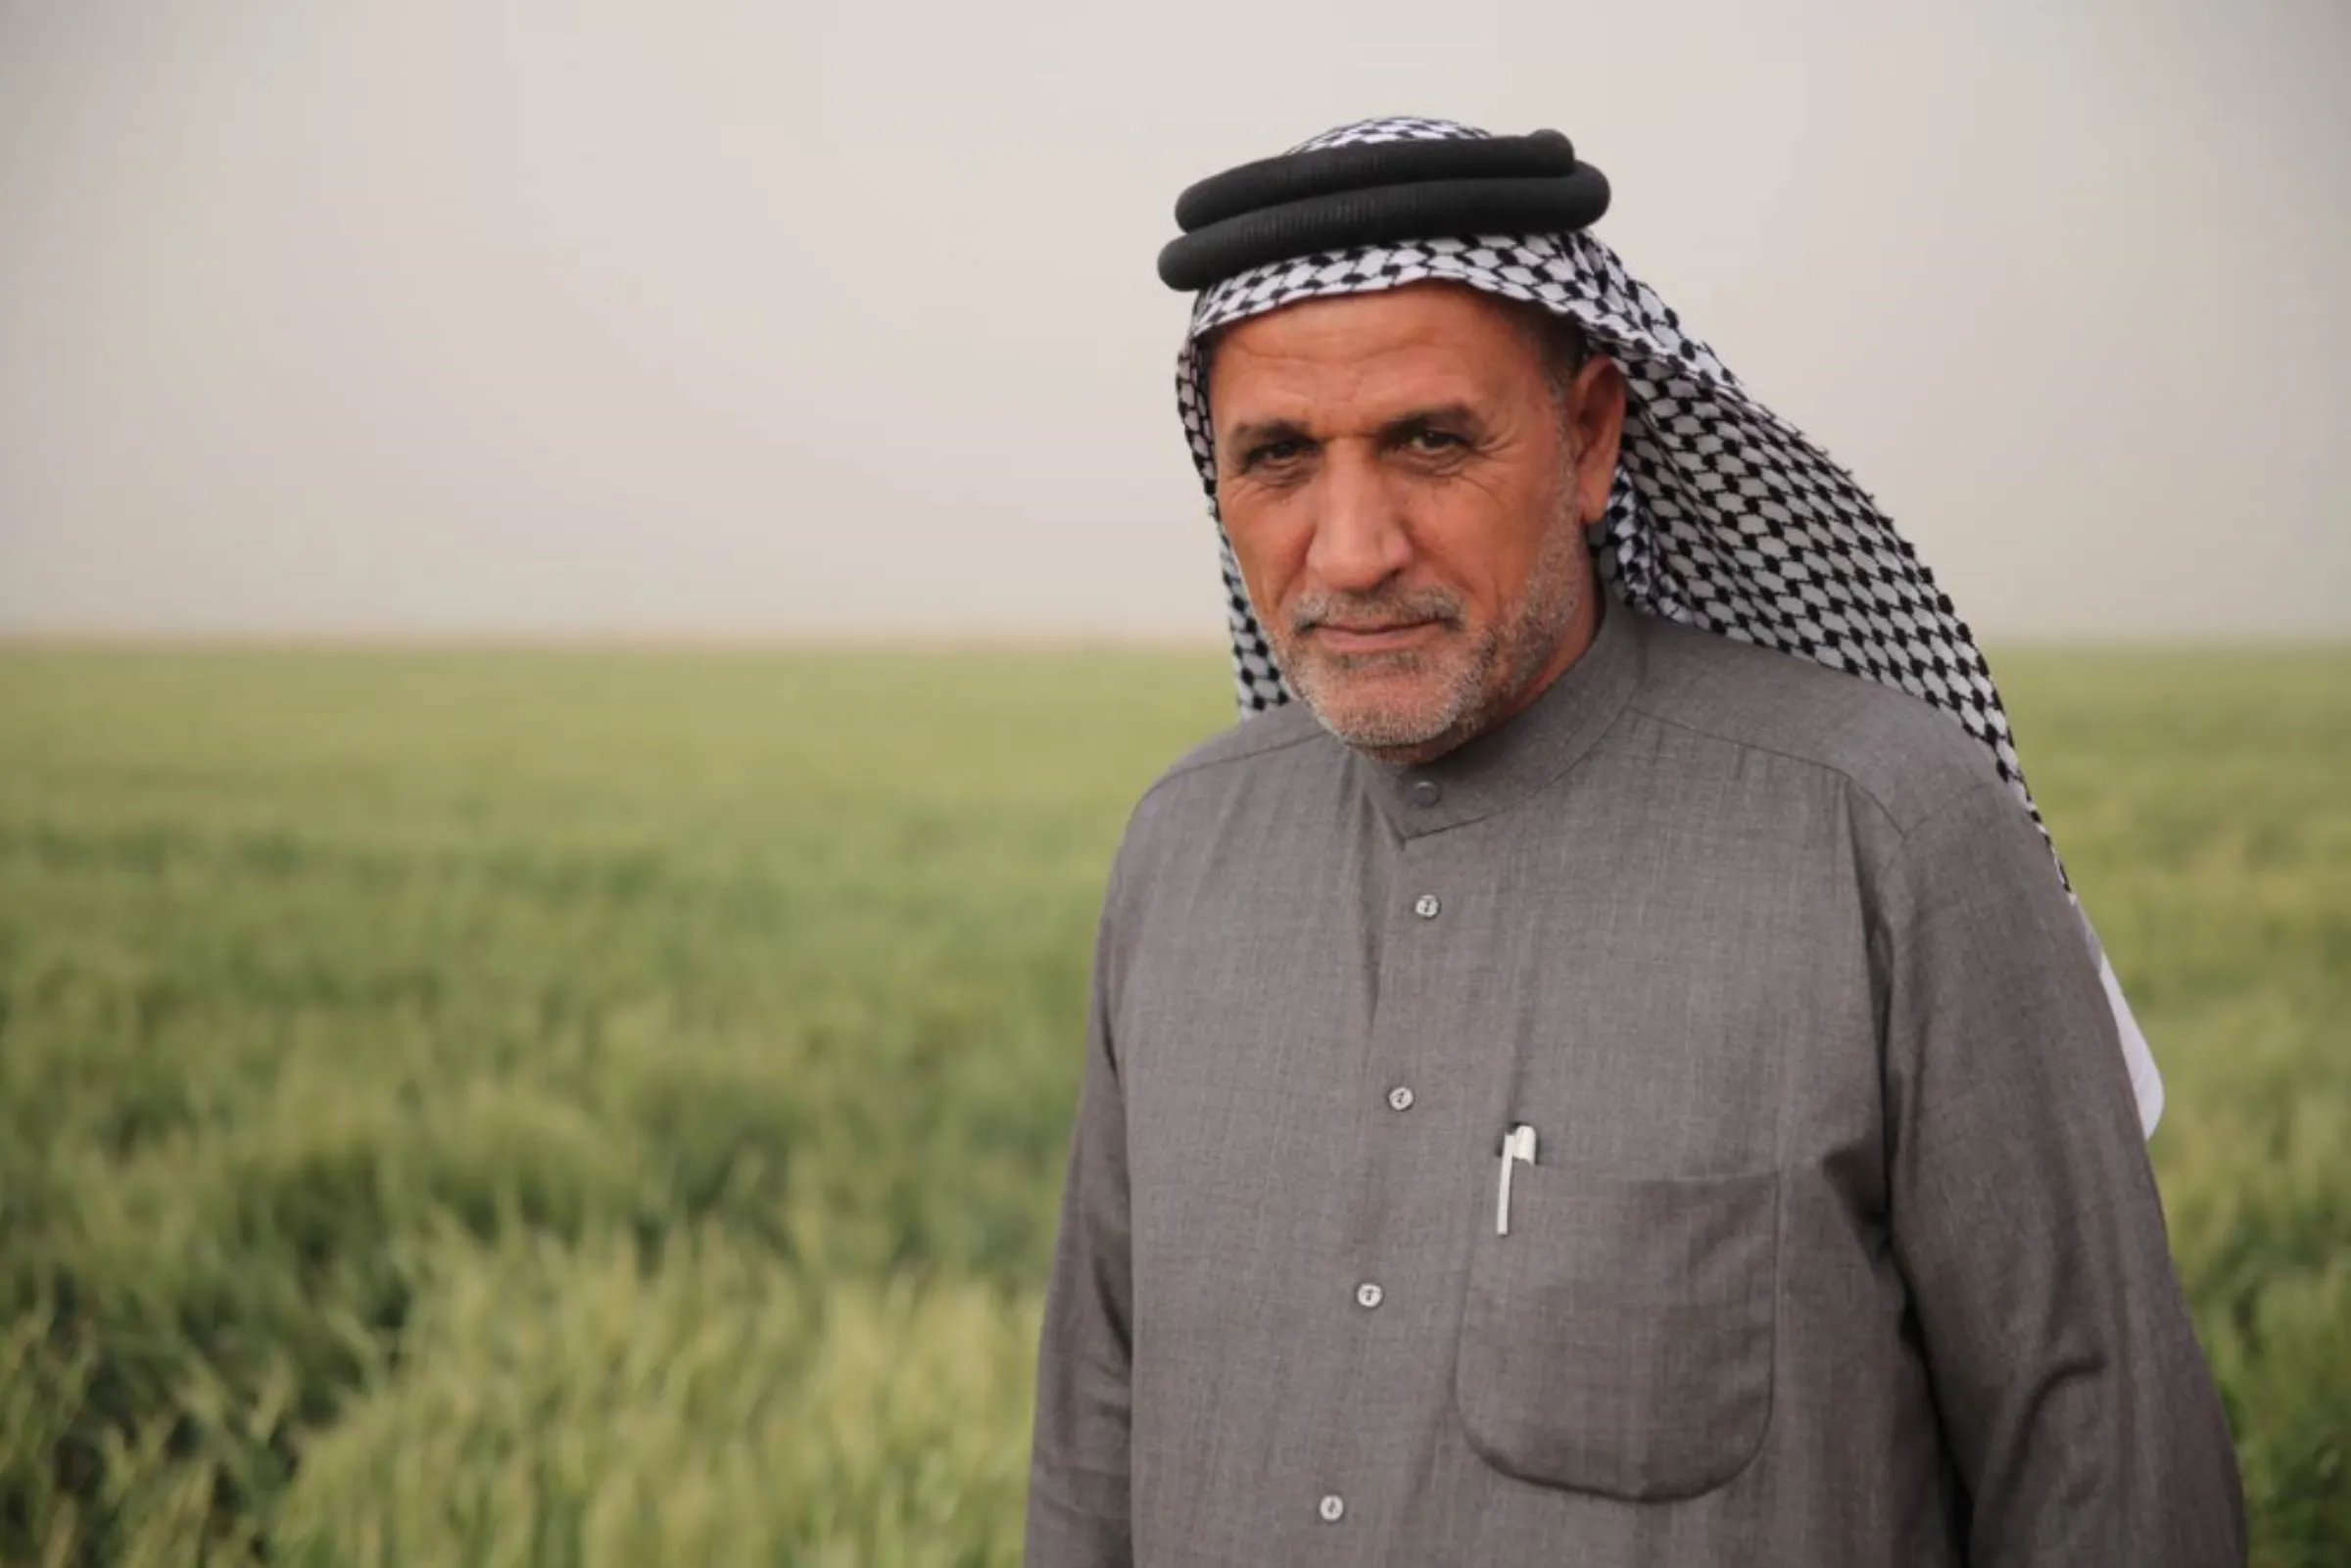 Wheat farmer Hadi Badr al Malaki stands in front of his wheat crop flattened by a sandstorm near the village of Al- Qurna in southern Iraq’s Basra governorate, March 7, 2022